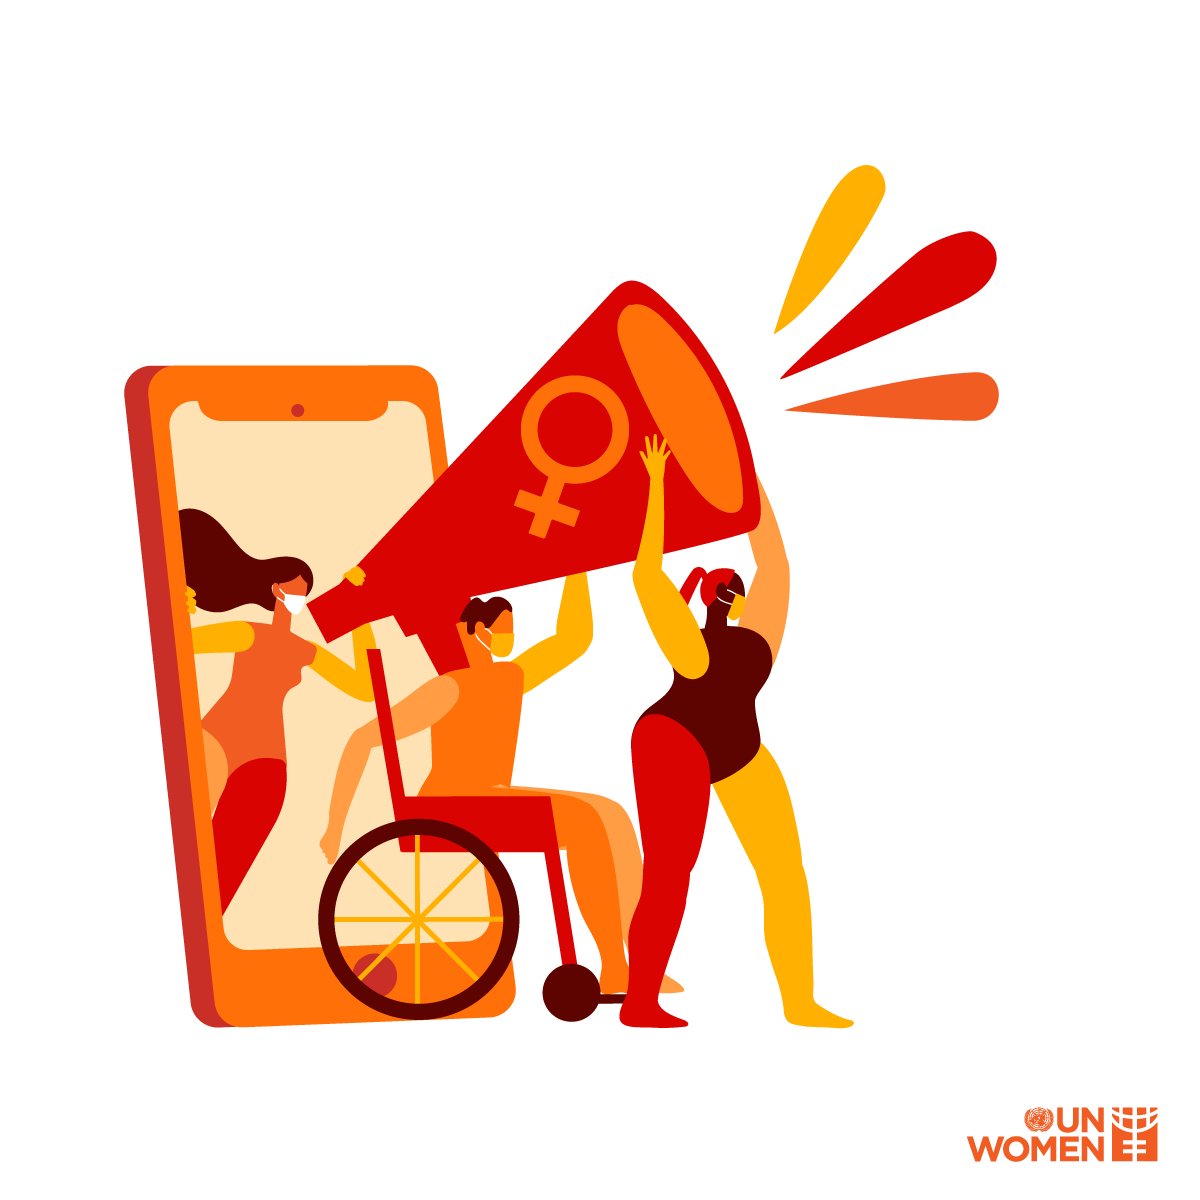 Call it out when you see it:
❌Abuse
❌Catcalling
❌Sexist jokes
❌Unwelcome behaviour
❌Inappropriate sexual comments
Sexual harassment is never okay. #16Days #OrangeTheWorld 
#16Days #PushForward
@untrustfundevaw #16DaysOfActivism
#trustfeminists #storyofresistance